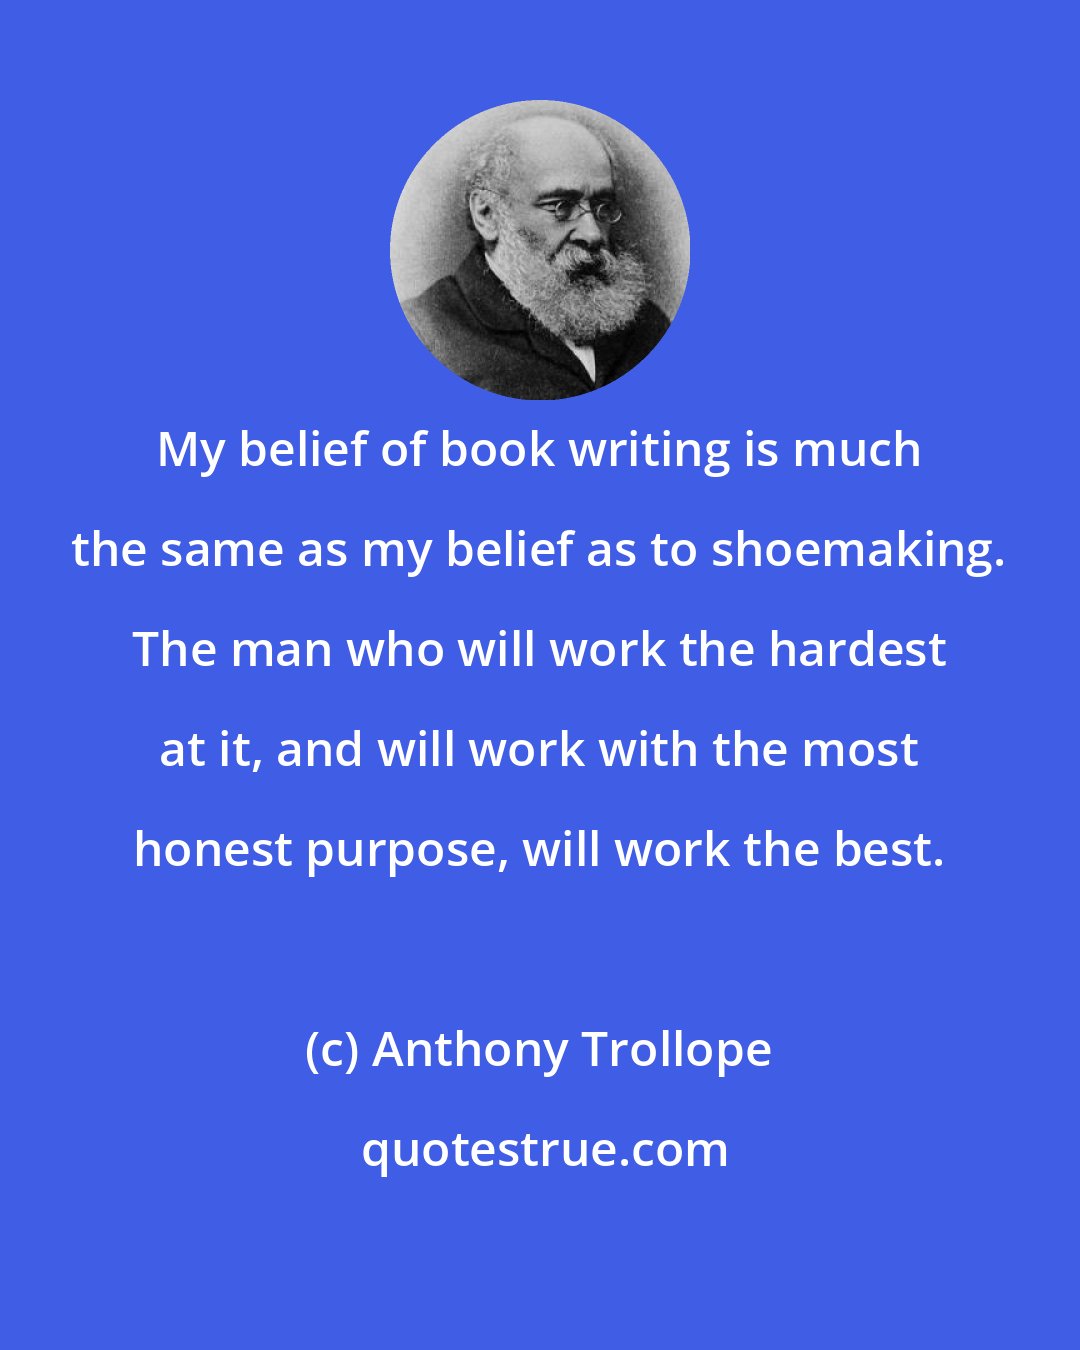 Anthony Trollope: My belief of book writing is much the same as my belief as to shoemaking. The man who will work the hardest at it, and will work with the most honest purpose, will work the best.